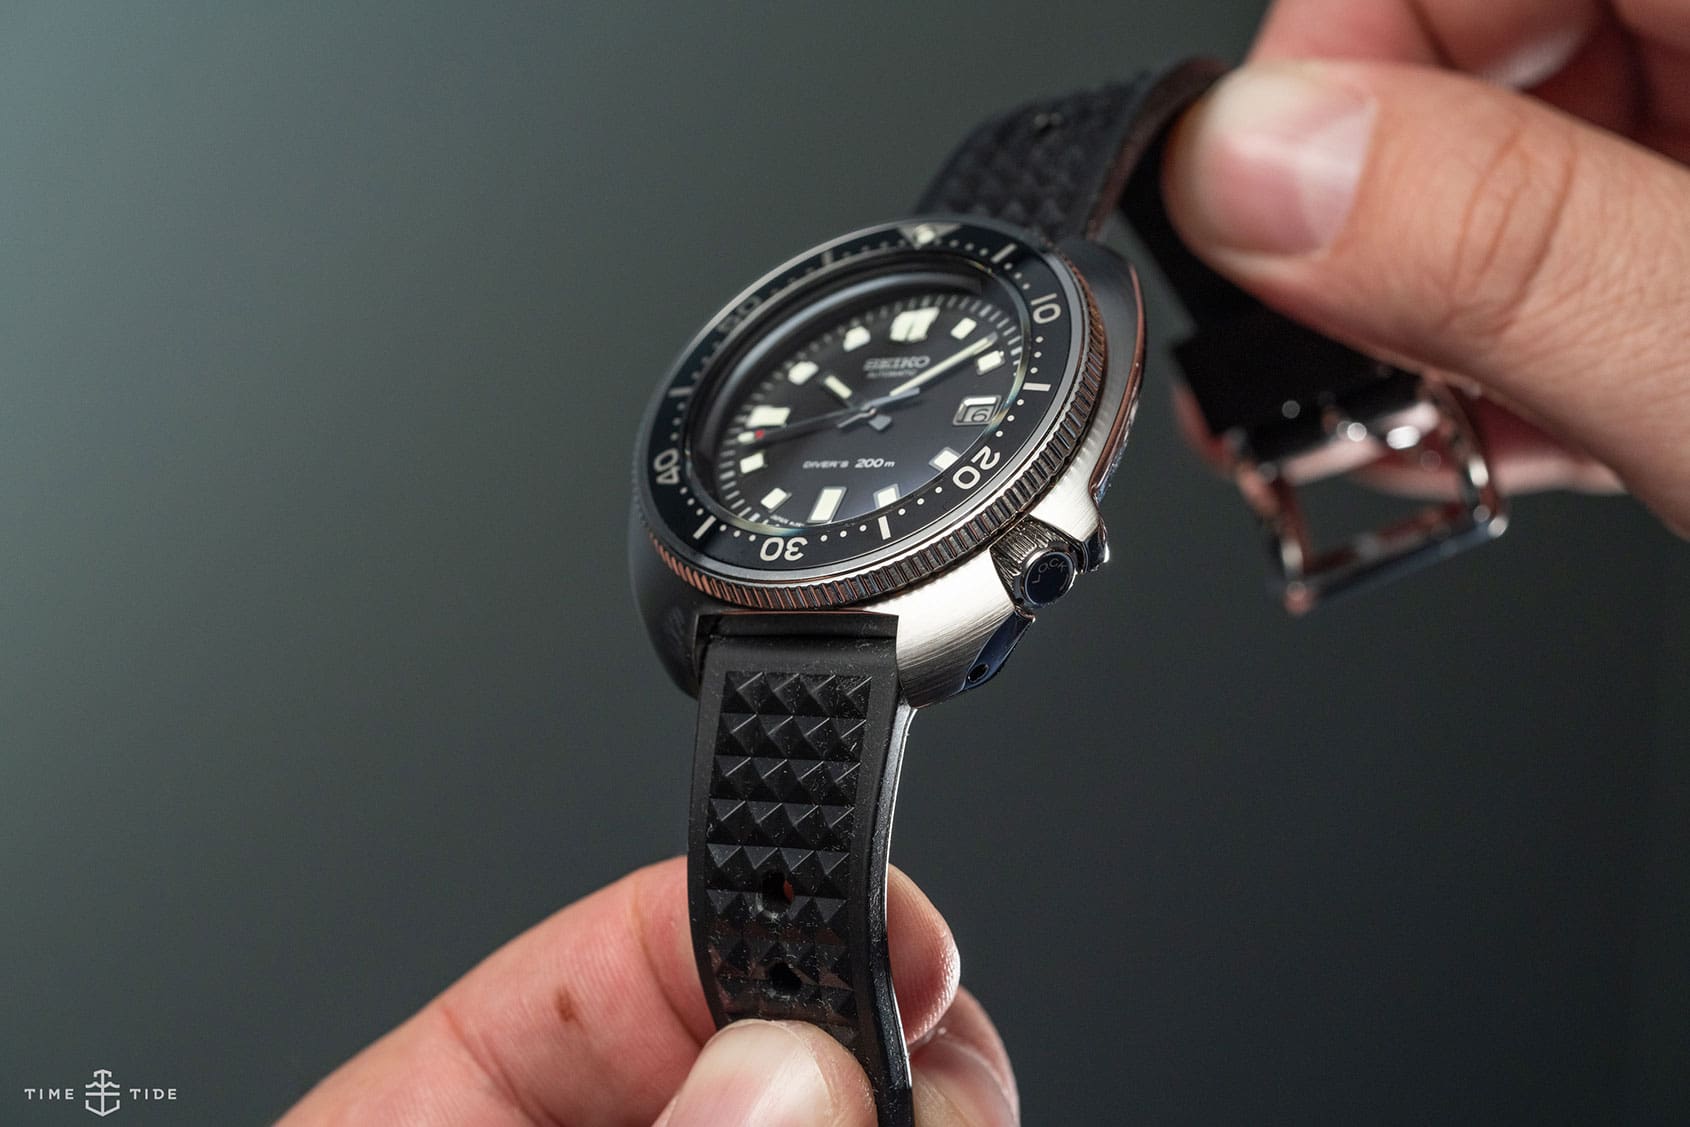 VIDEO: This is what a heritage reissue should look like – the Seiko SLA033